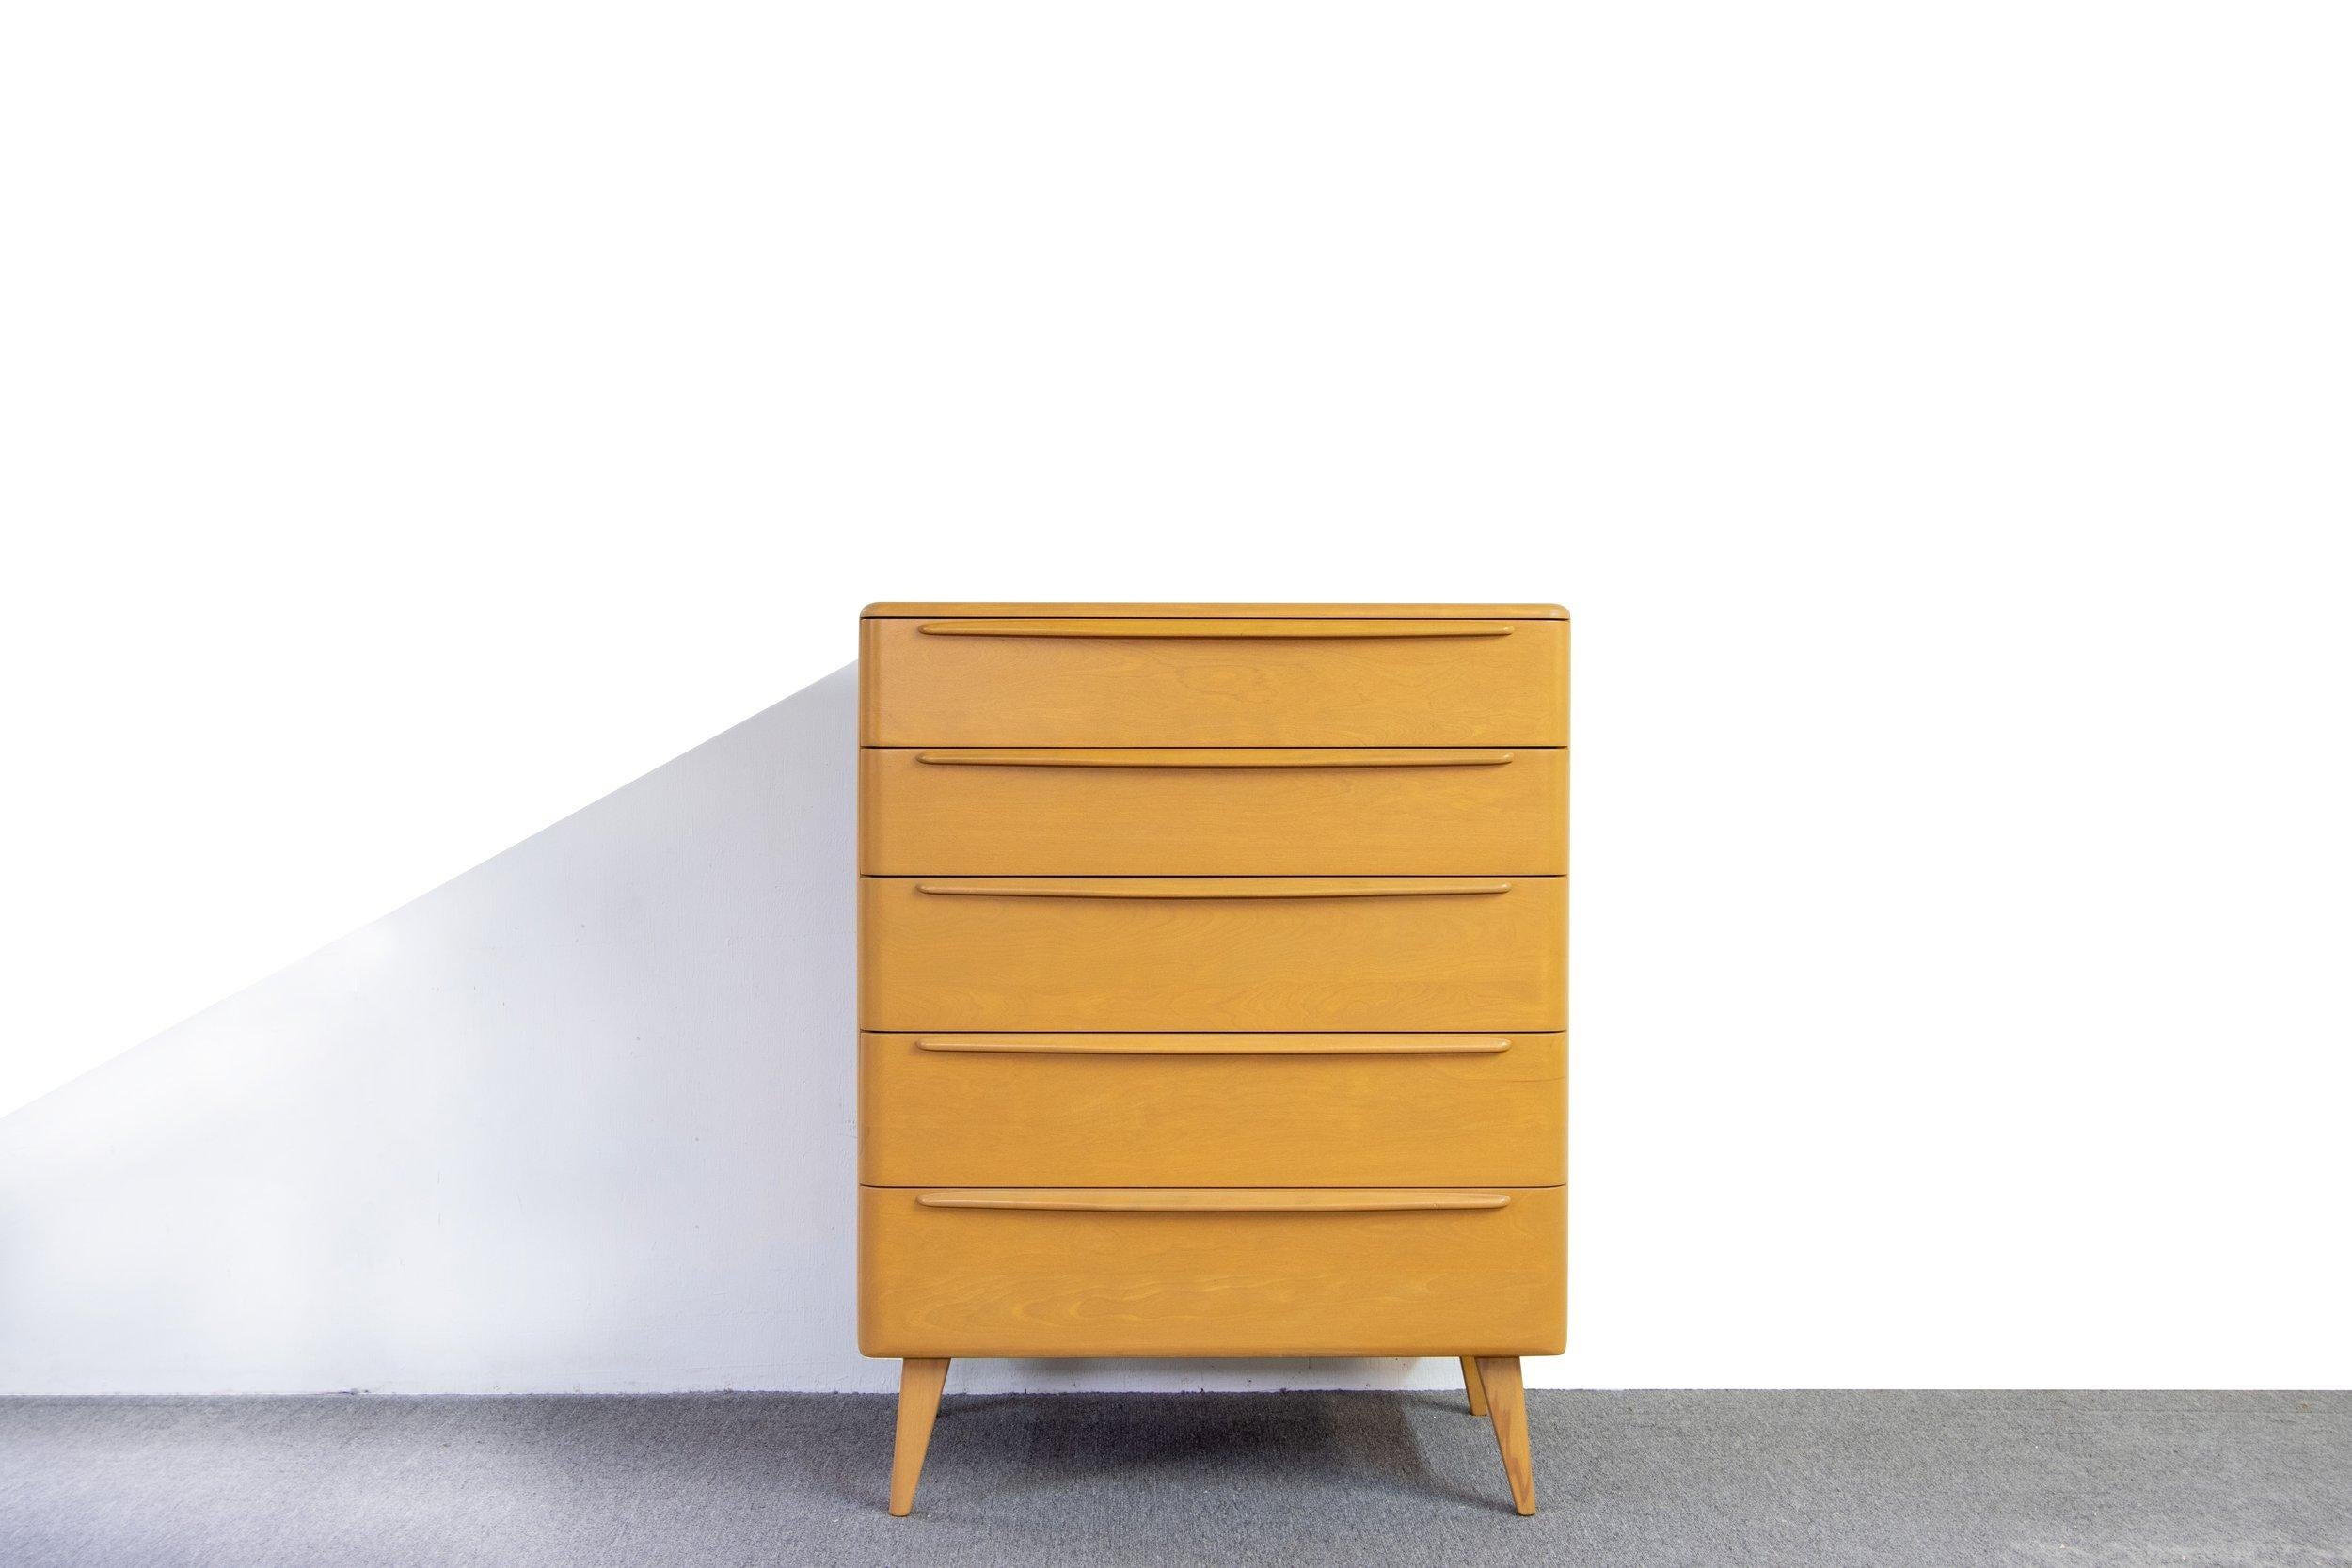 An exceptional 1950s, Heywood Wakefield Encore 5 drawer high boy dresser in a beautiful wheat color.   Great rounded edges with elongated drawer pulls that span the width of the drawers. This piece was stripped and professionally refinished with a